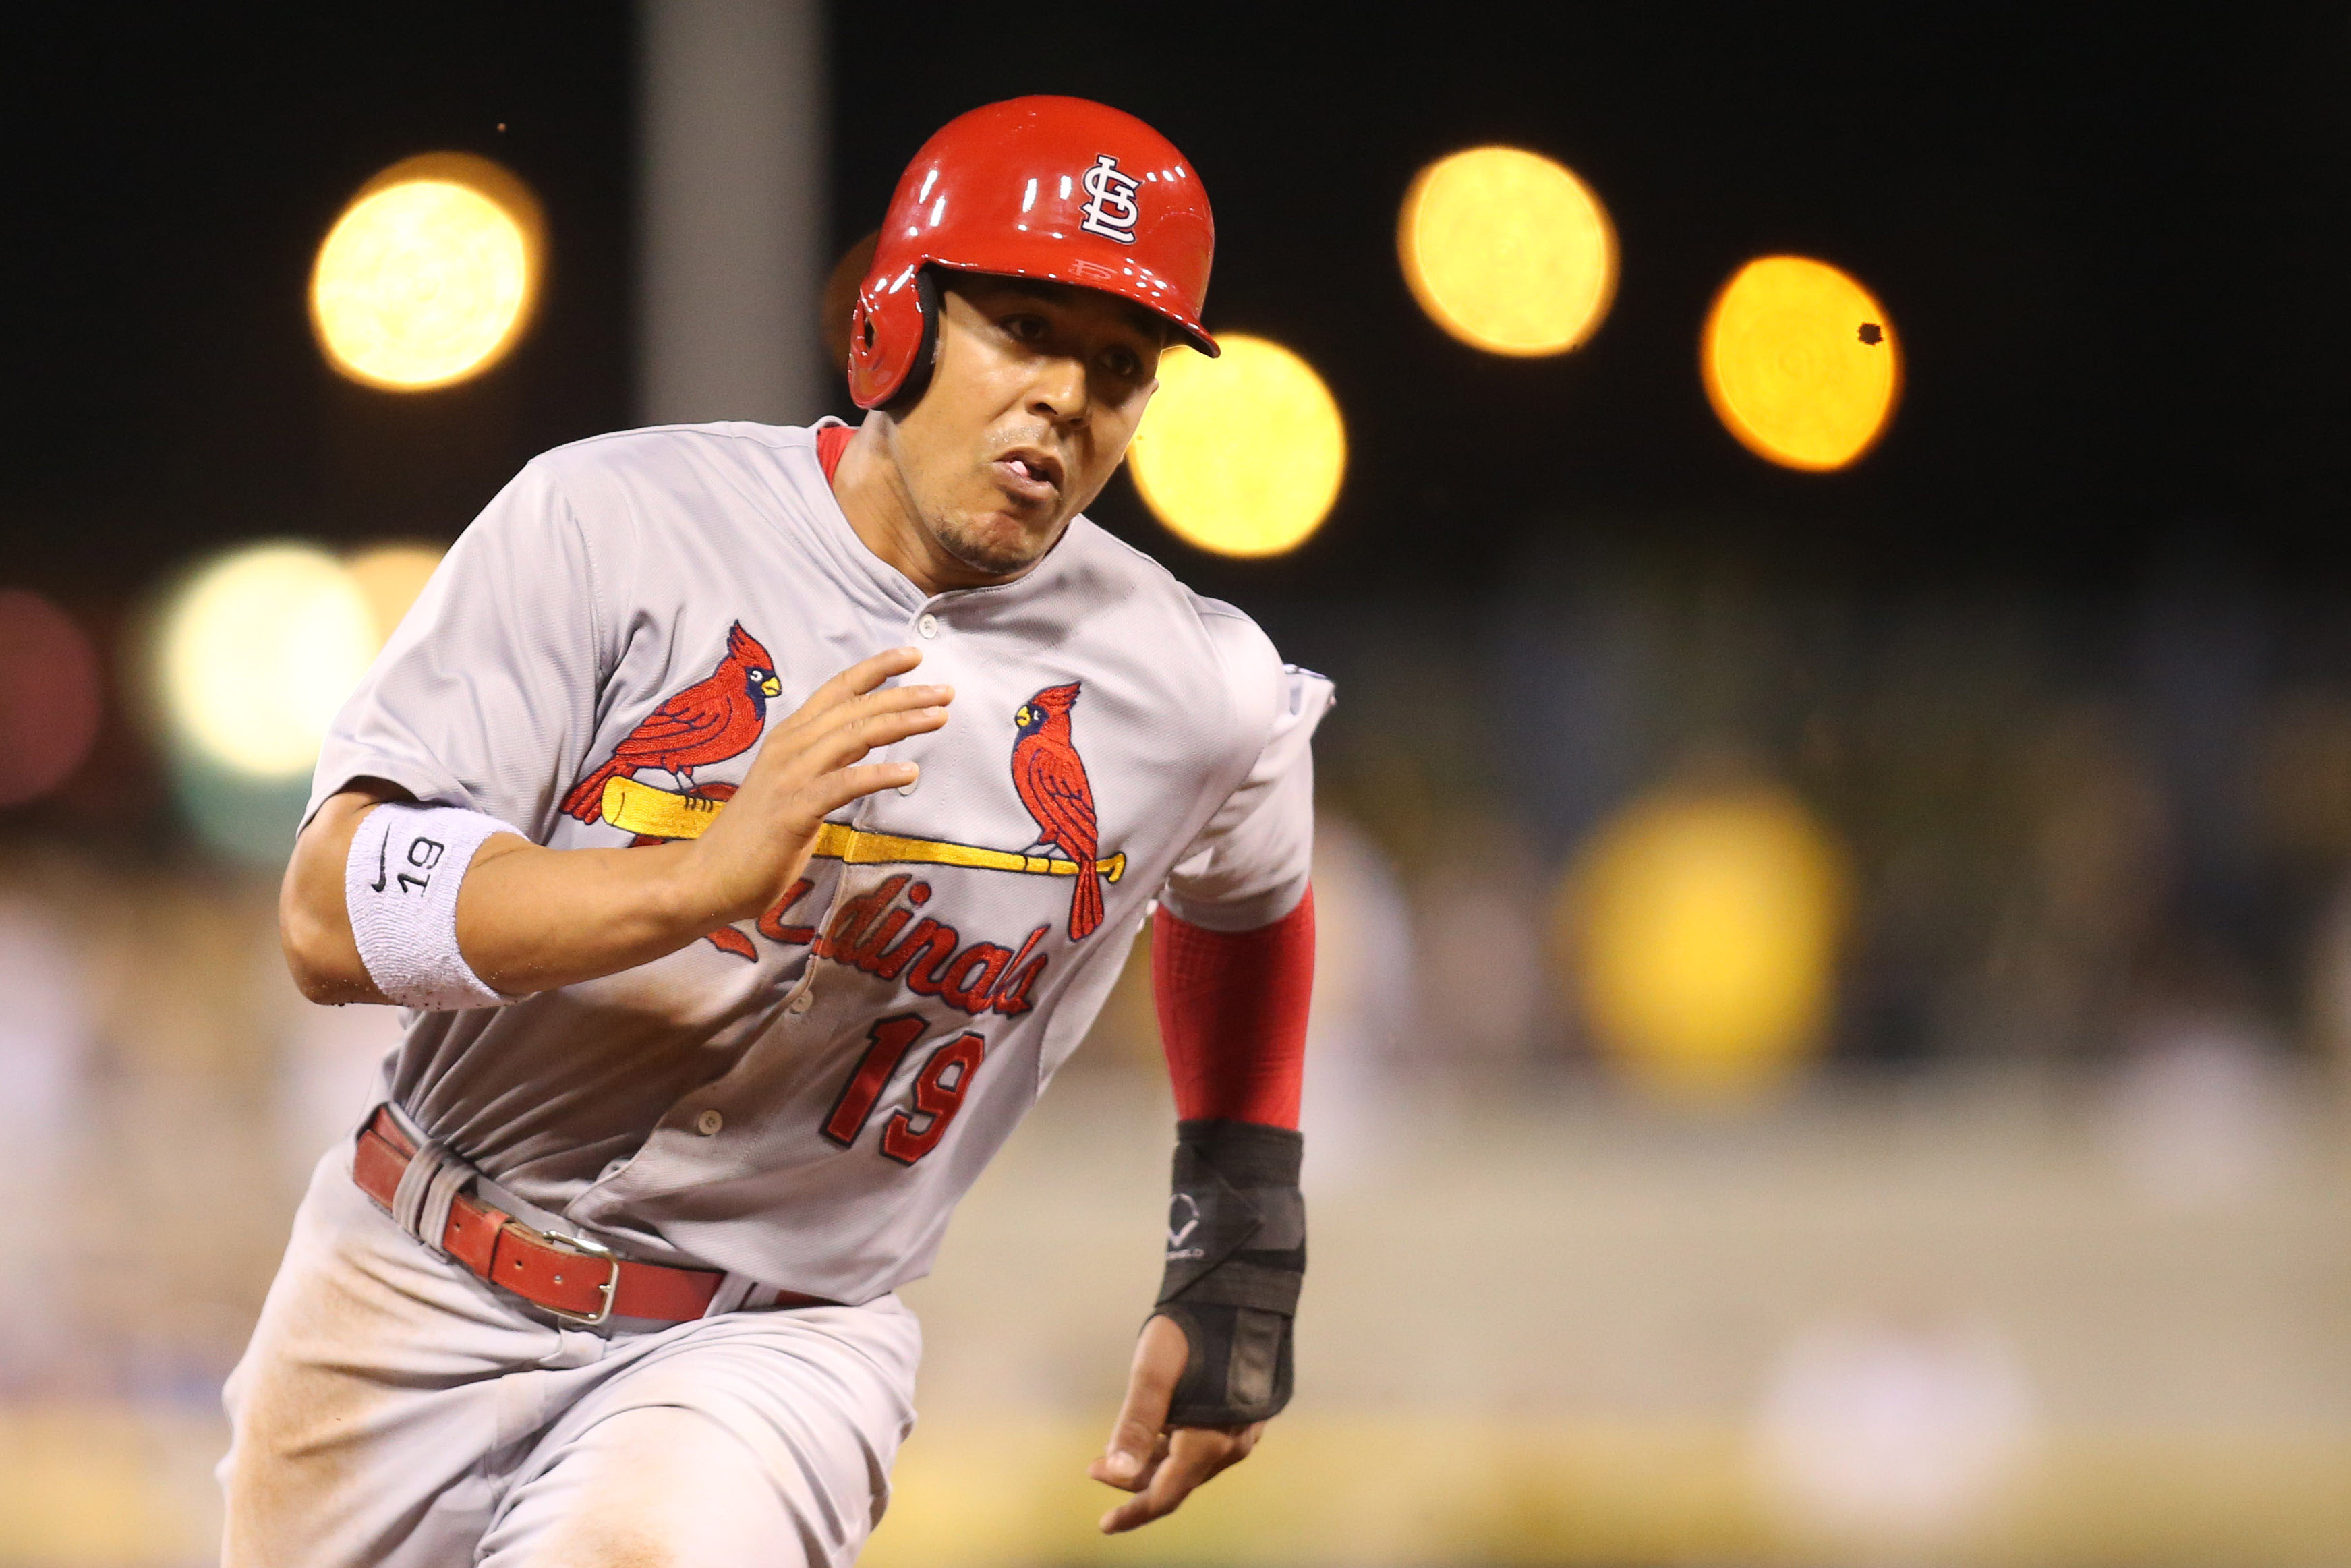 Watch Jon Jay's catch save the day for the St. Louis Cardinals in